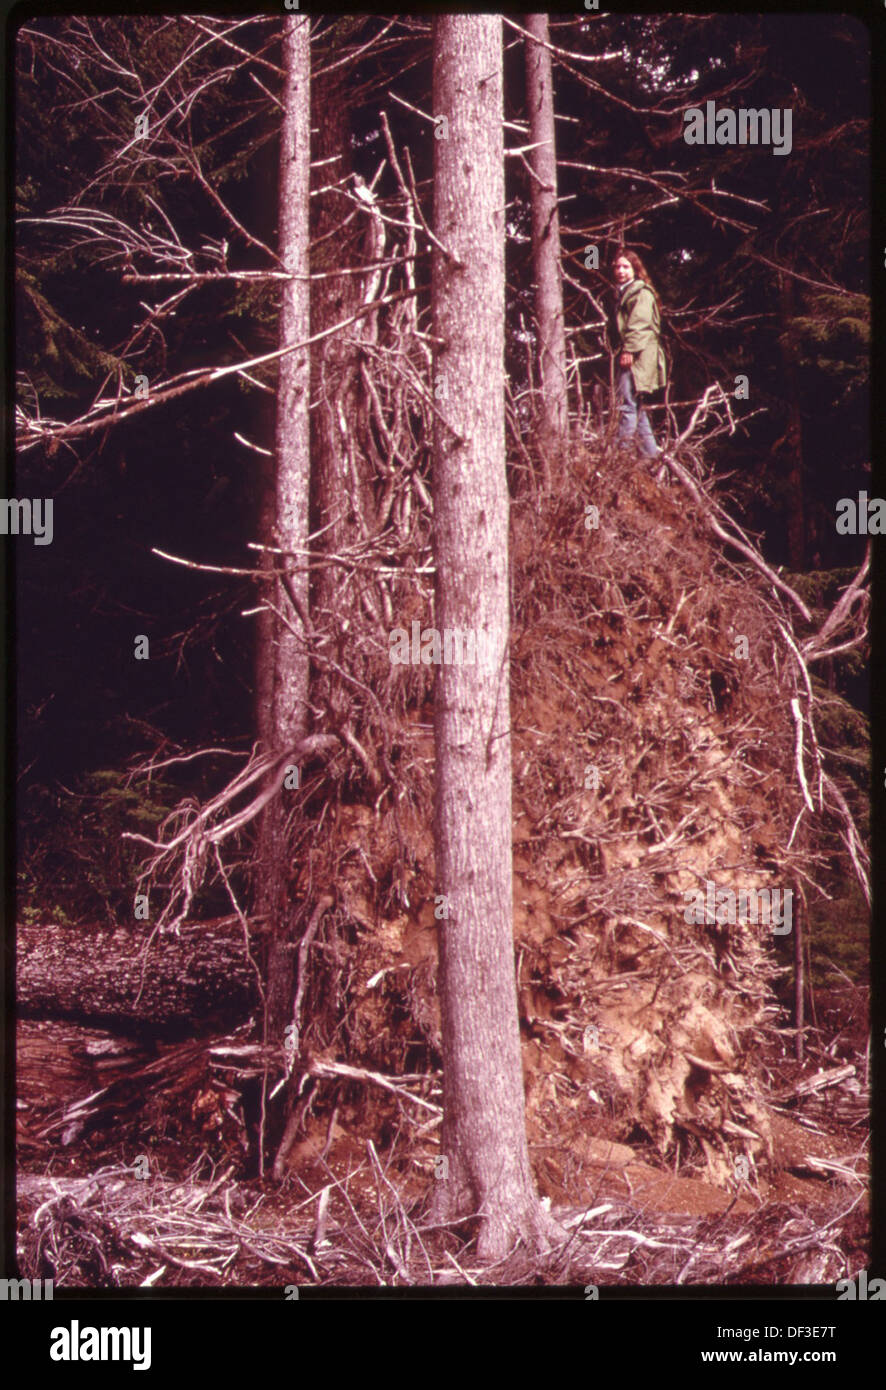 A SITKA SPRUCE TREE, APPROXIMATELY 200 FEET TALL, BLOWN DOWN THE TRUNK'S DIAMETER MEASURED THREE FEET AT THREE FEET... 555152 Portrait Stock Photo